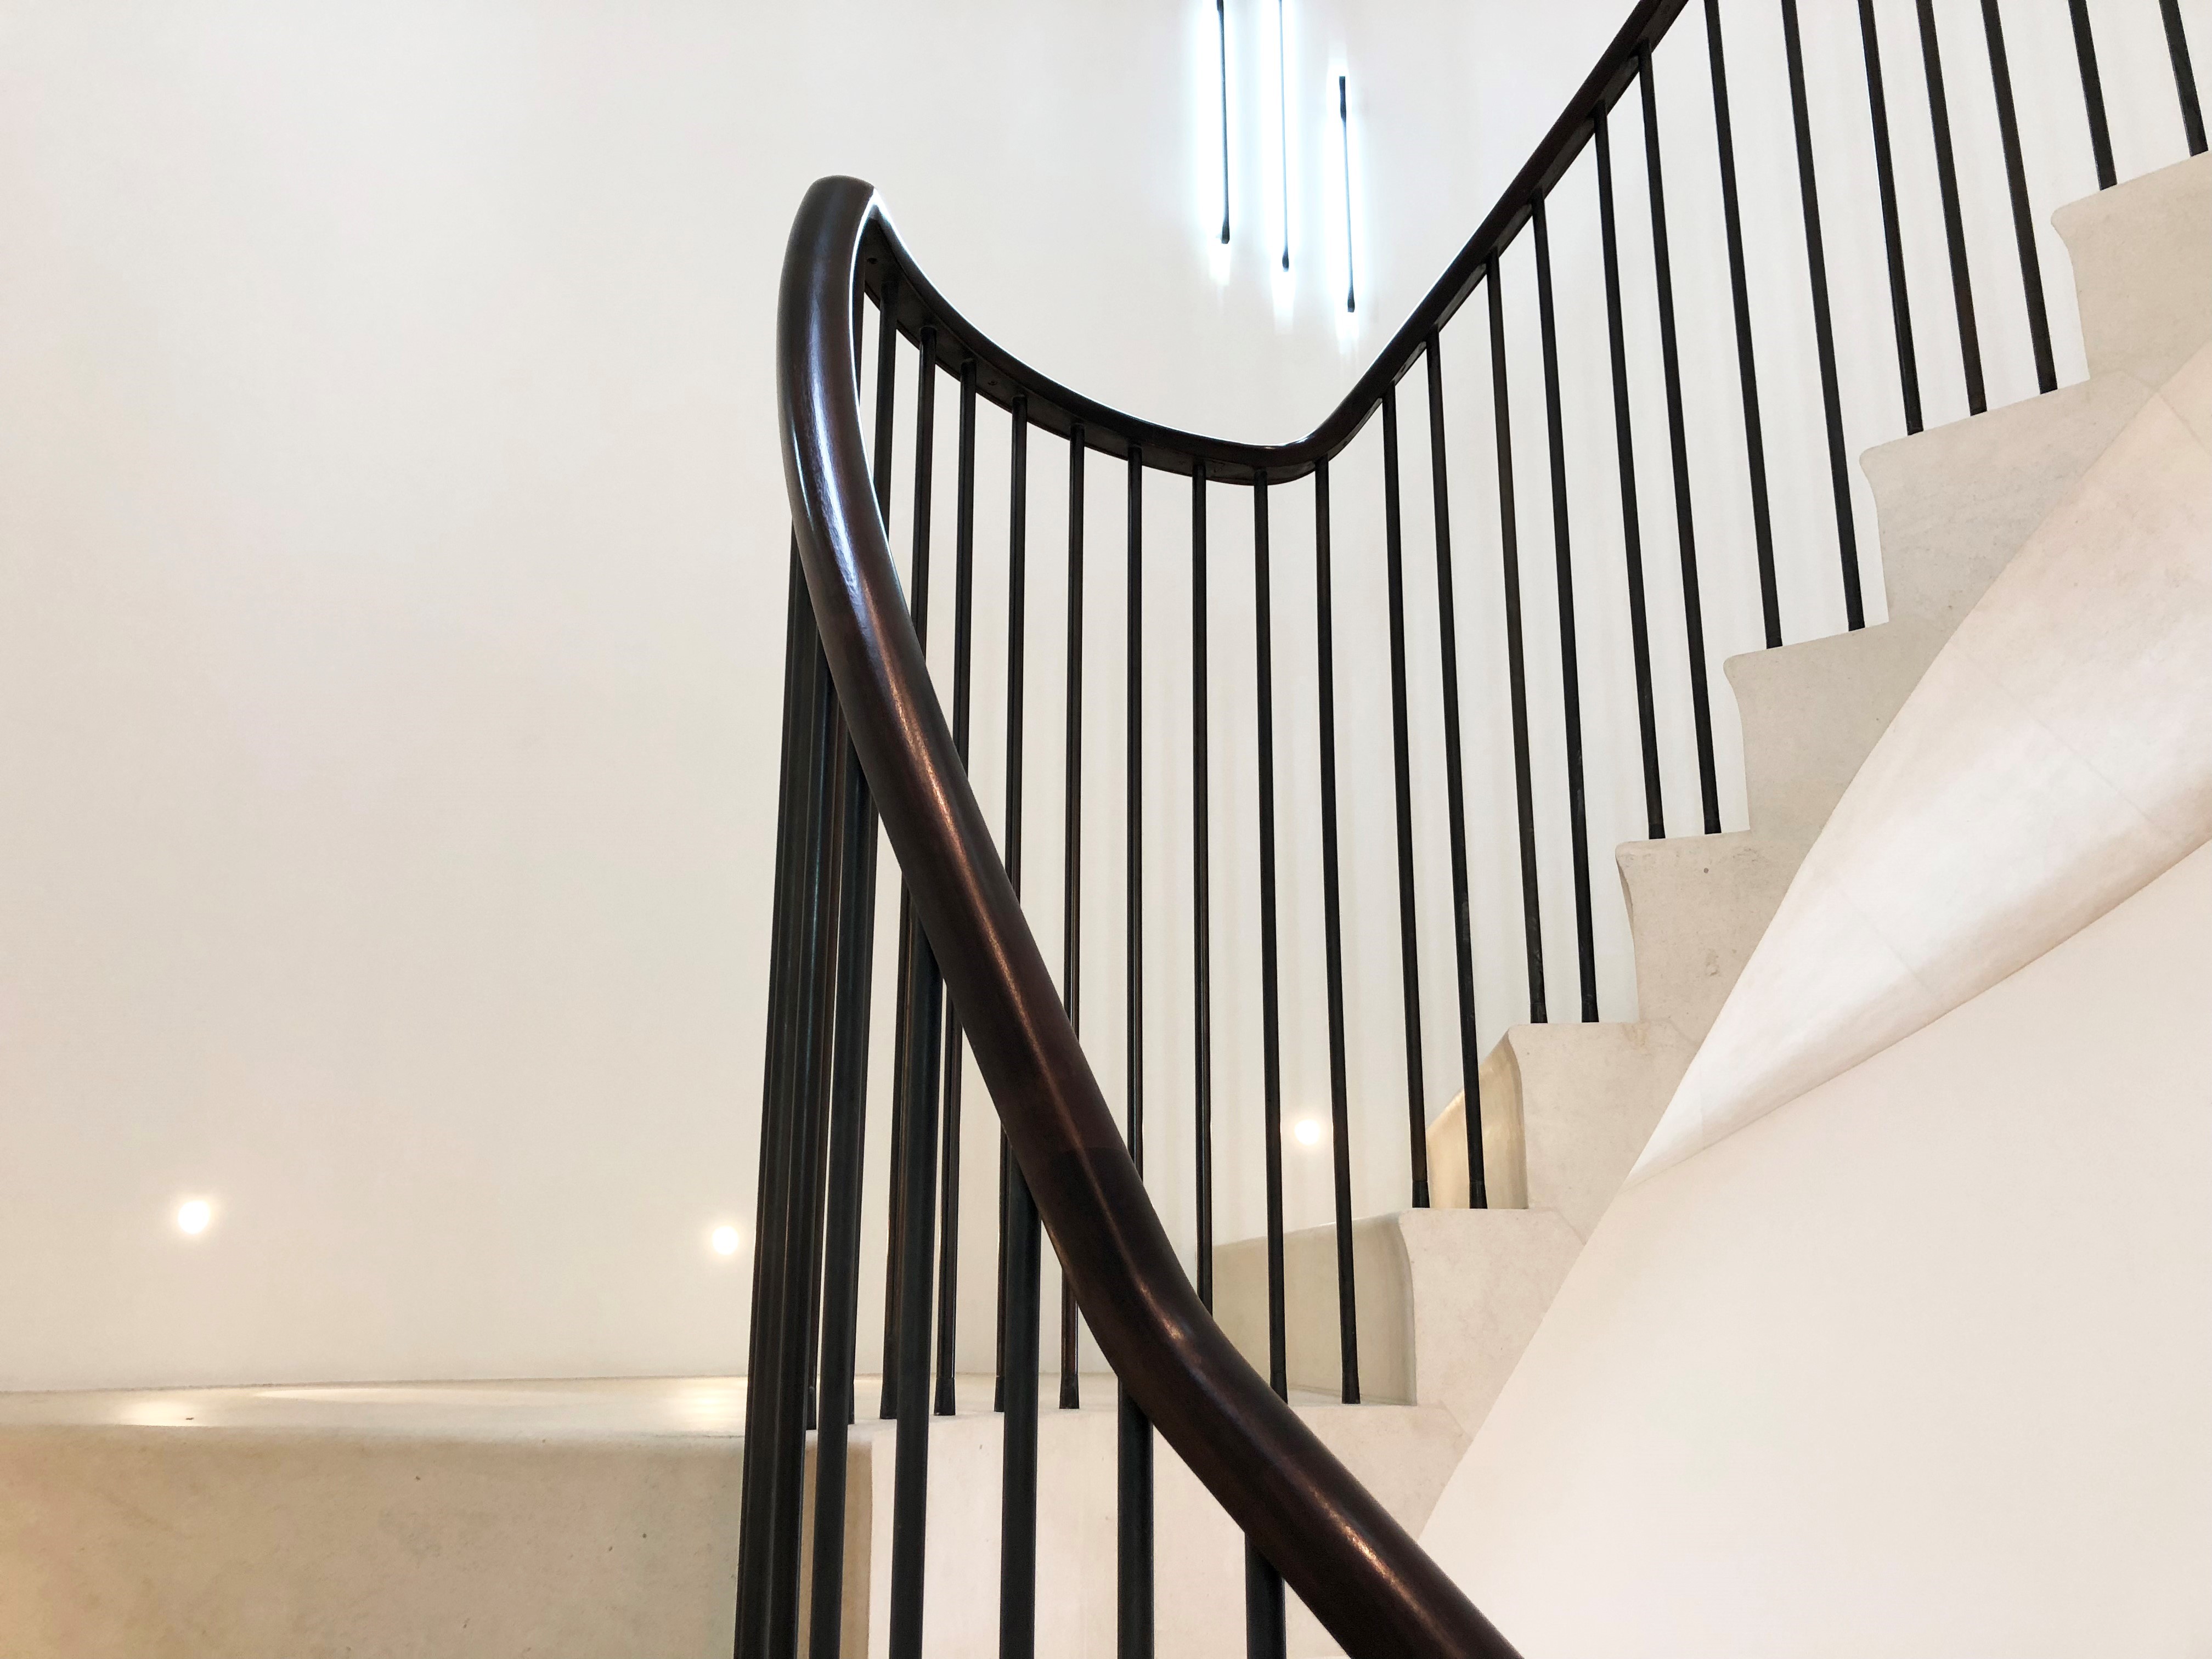 What Is A Curved Staircase Solution?